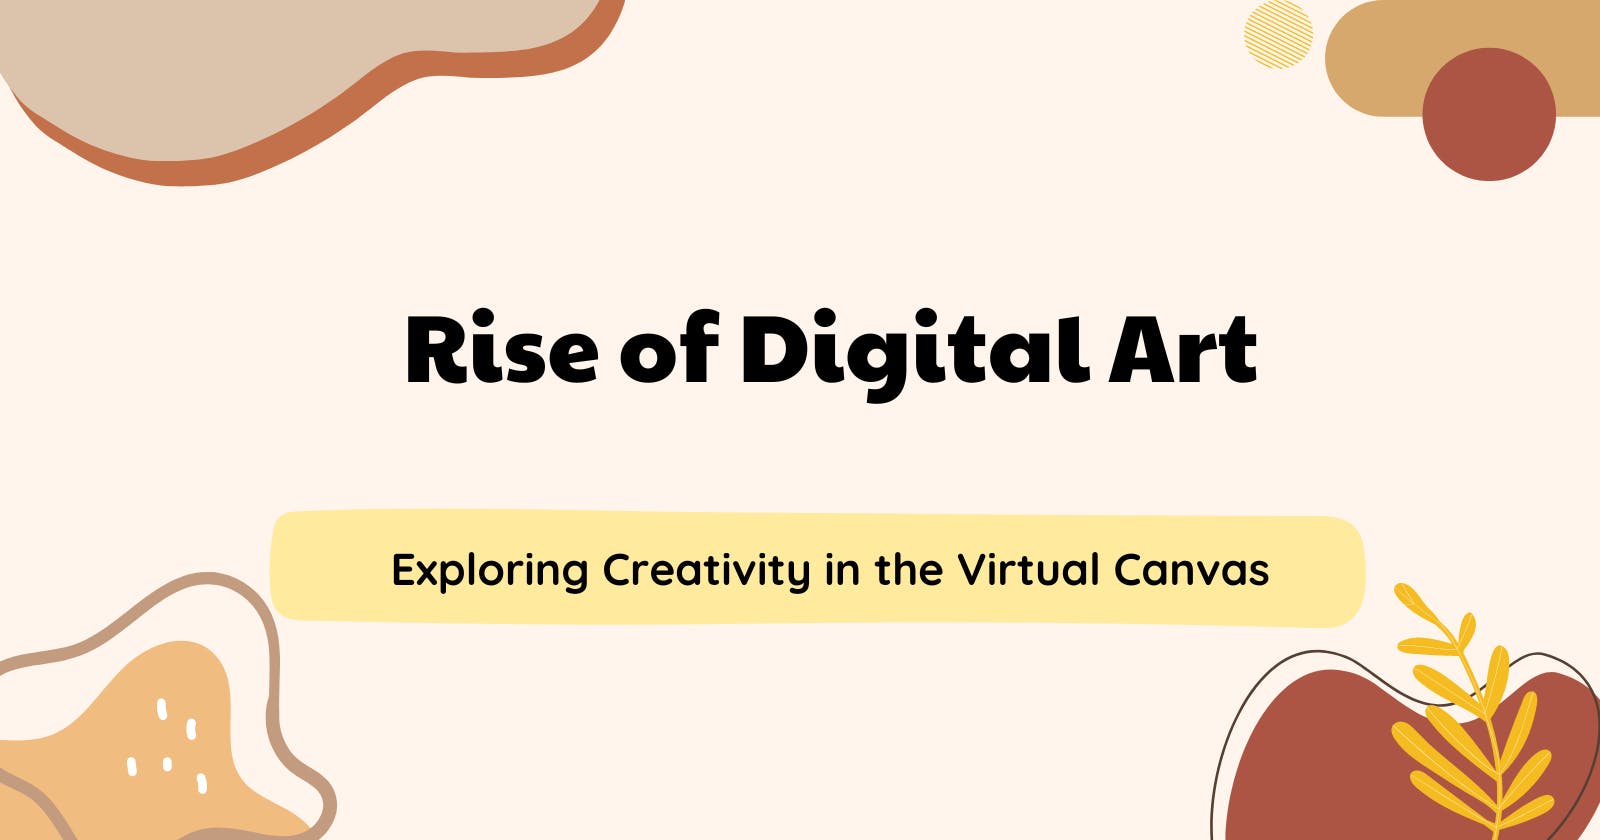 The Rise of Digital Art: Exploring Creativity in the Virtual Canvas